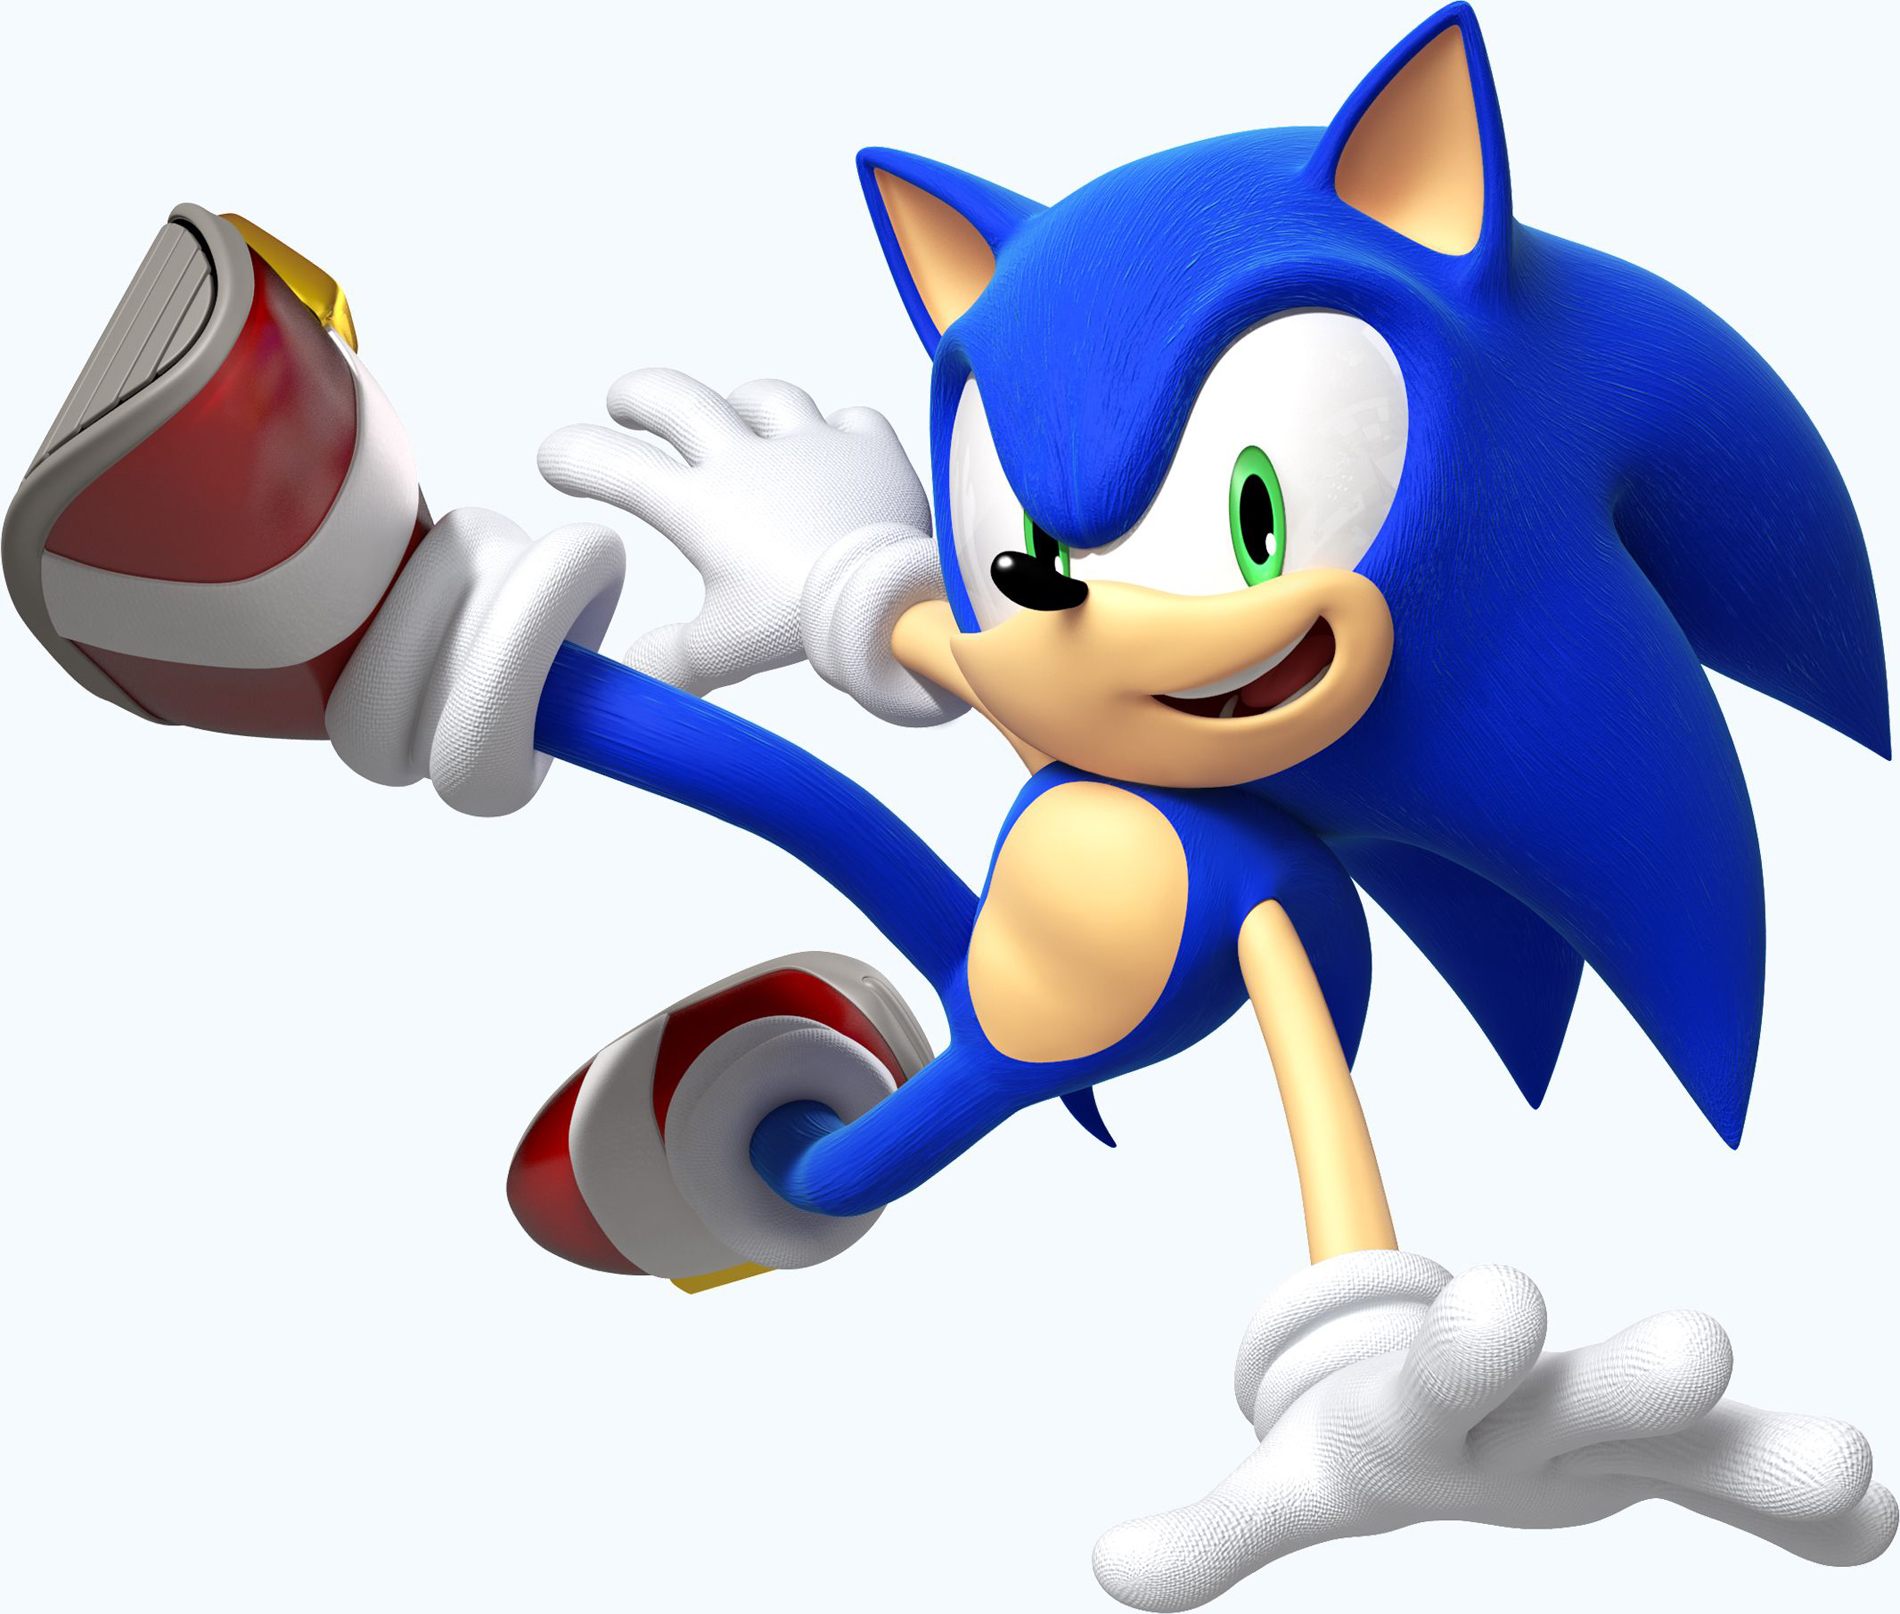 http://img2.wikia.nocookie.net/__cb20140113194931/sonic/es/images/8/8b/Sonic-Lost-World-01.jpg